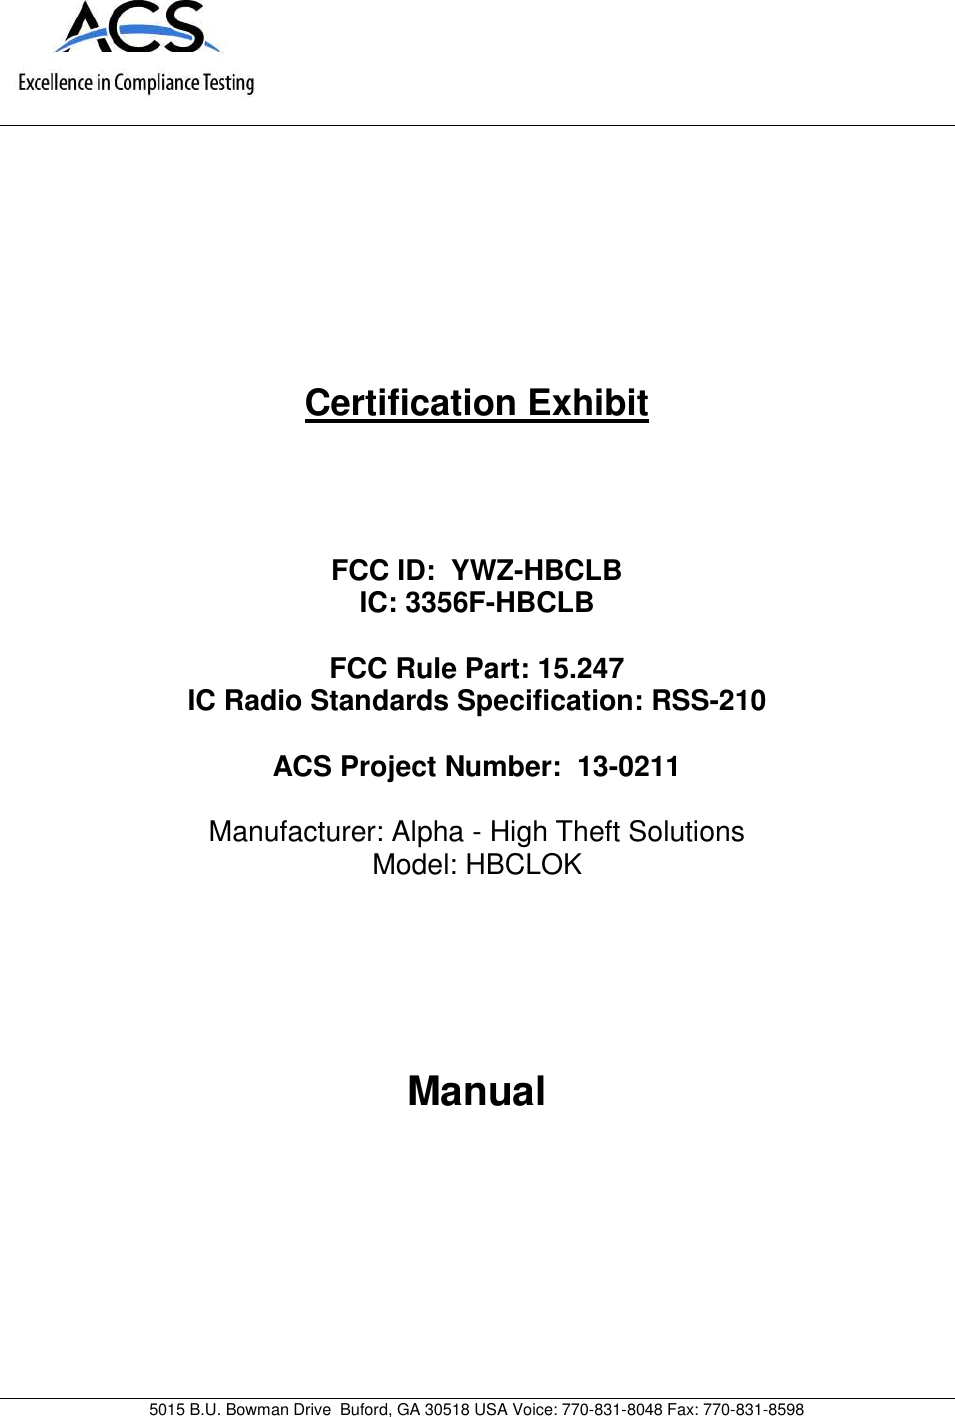 5015 B.U. Bowman Drive Buford, GA 30518 USA Voice: 770-831-8048 Fax: 770-831-8598Certification ExhibitFCC ID: YWZ-HBCLBIC: 3356F-HBCLBFCC Rule Part: 15.247IC Radio Standards Specification: RSS-210ACS Project Number: 13-0211Manufacturer: Alpha - High Theft SolutionsModel: HBCLOKManual